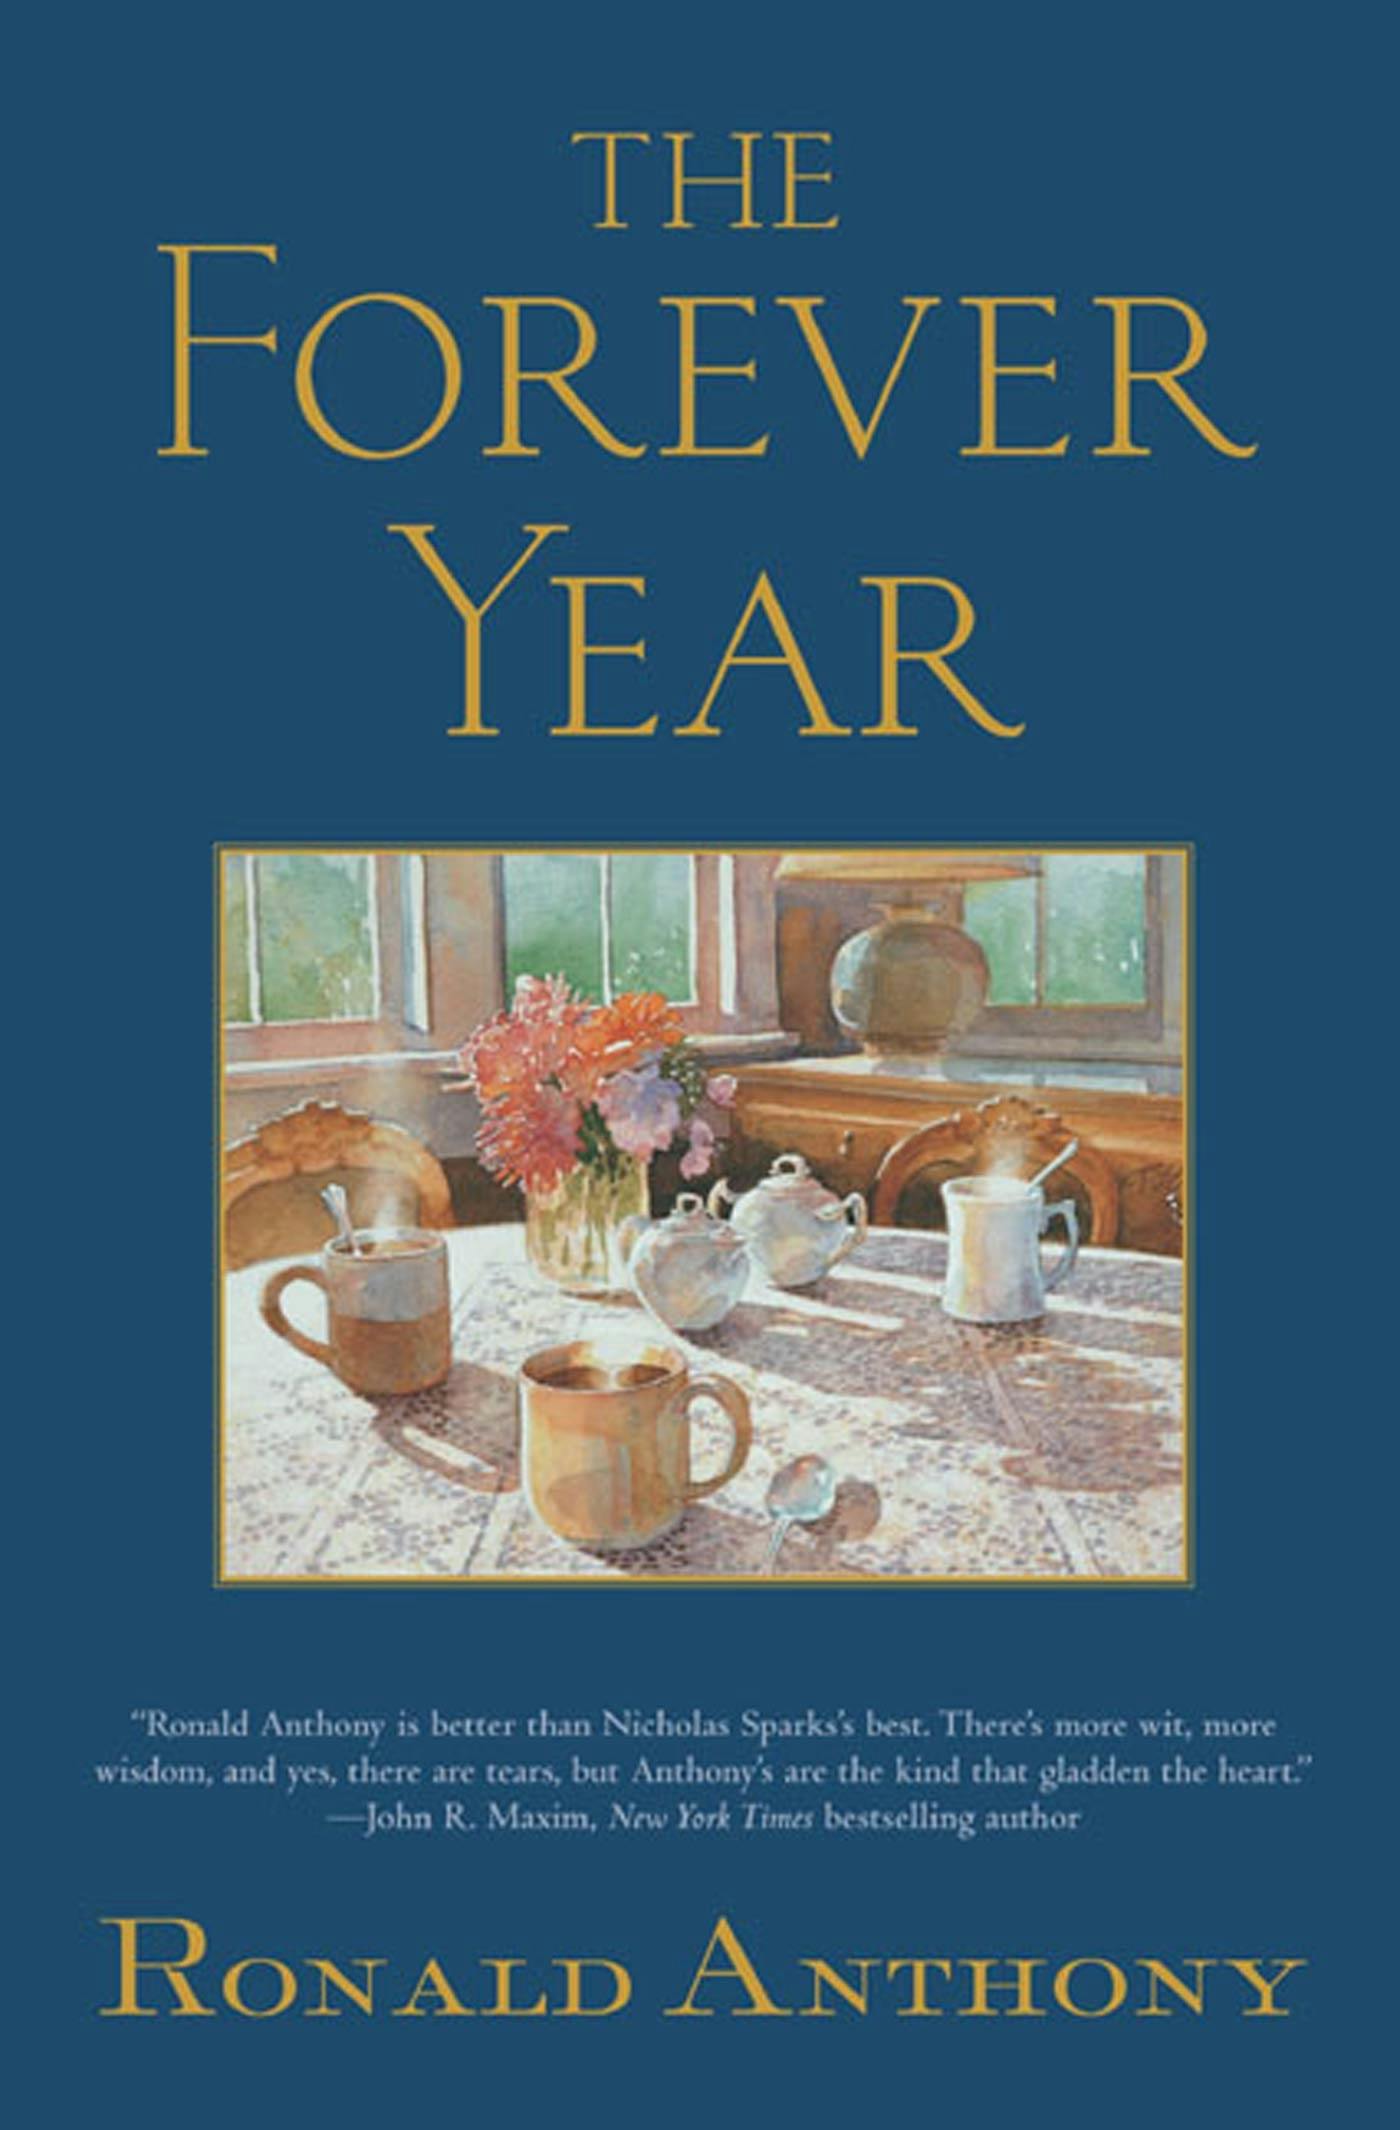 Cover for the book titled as: The Forever Year